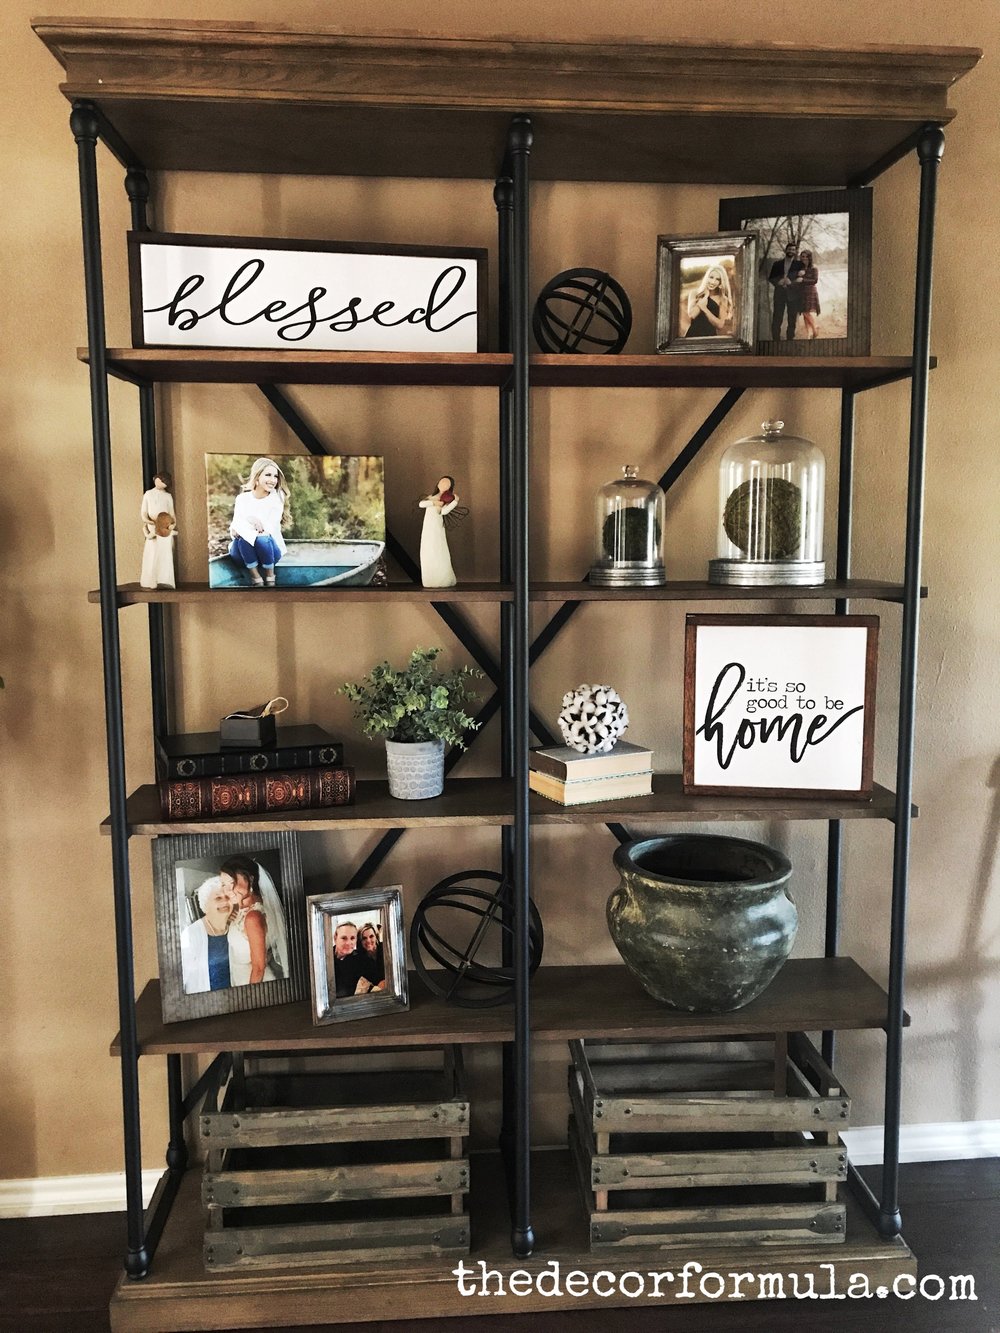 How To Decorate Display Shelves The, Display Shelving Units